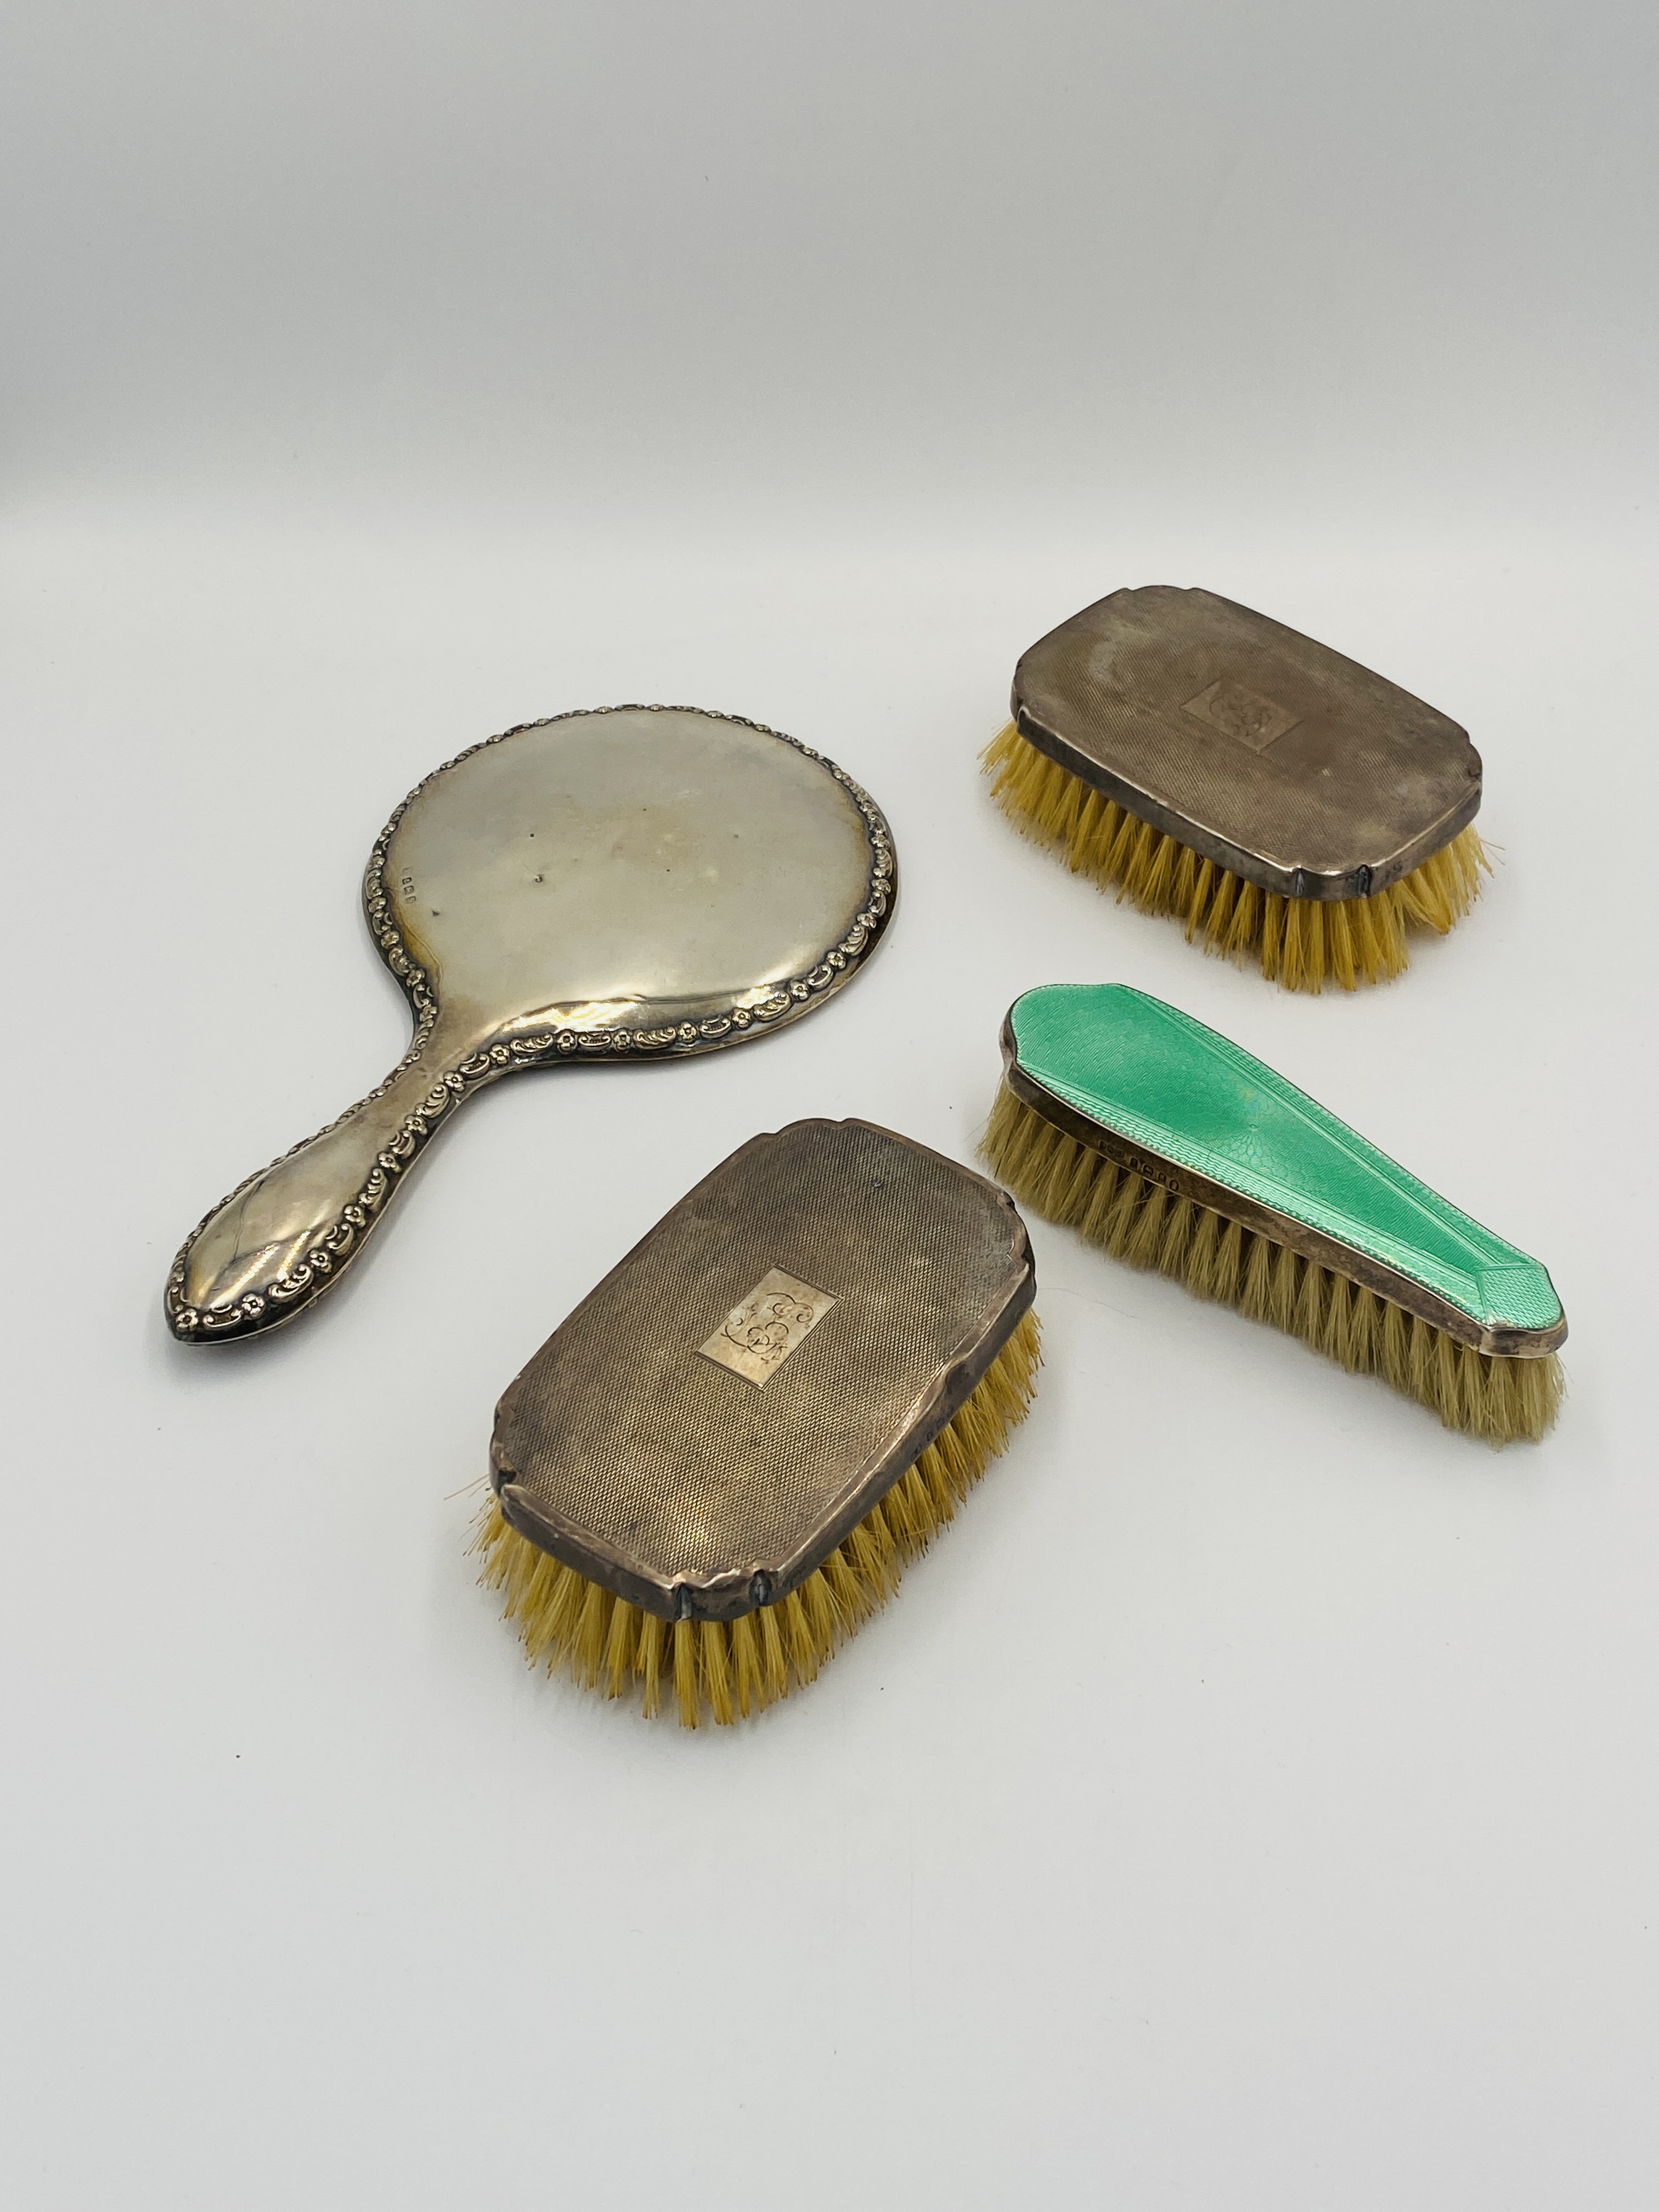 SIlver backed mirror and brushes - Image 2 of 6